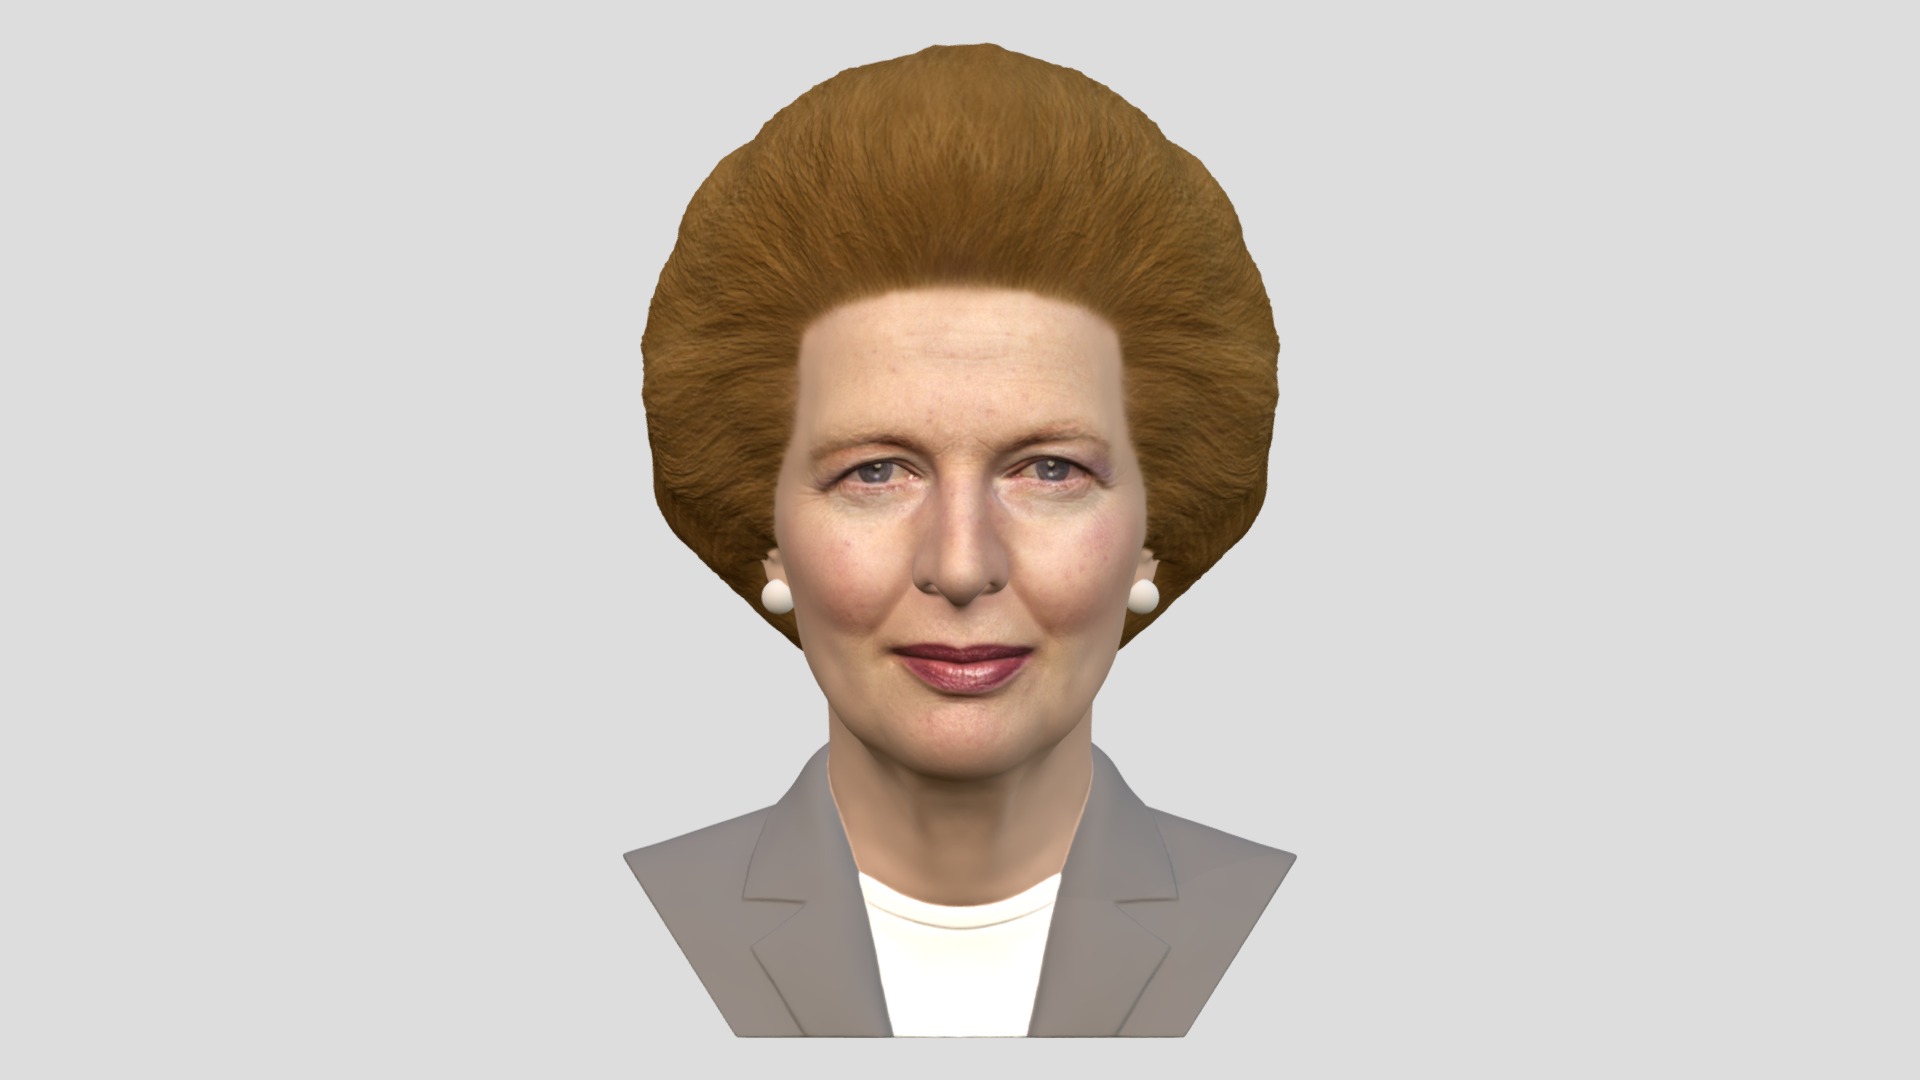 3D model Margaret Thatcher bust full color 3D printing - This is a 3D model of the Margaret Thatcher bust full color 3D printing. The 3D model is about a person with a large head.